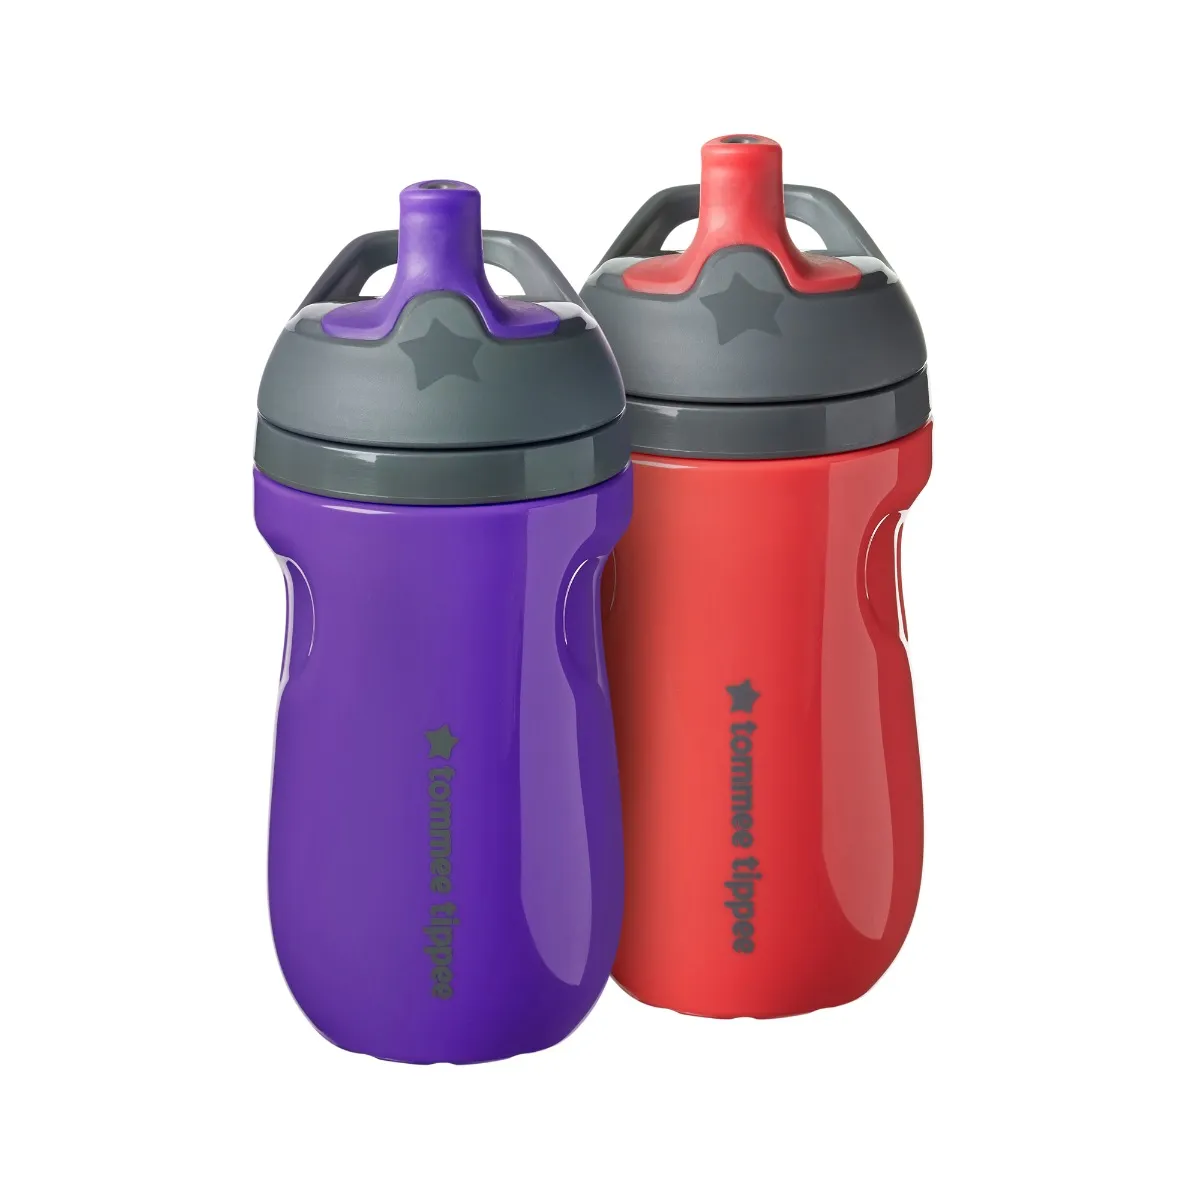 https://secure.tommeetippee.com/media/catalog/product/p/u/purple_and_red_sportee_cup.jpg